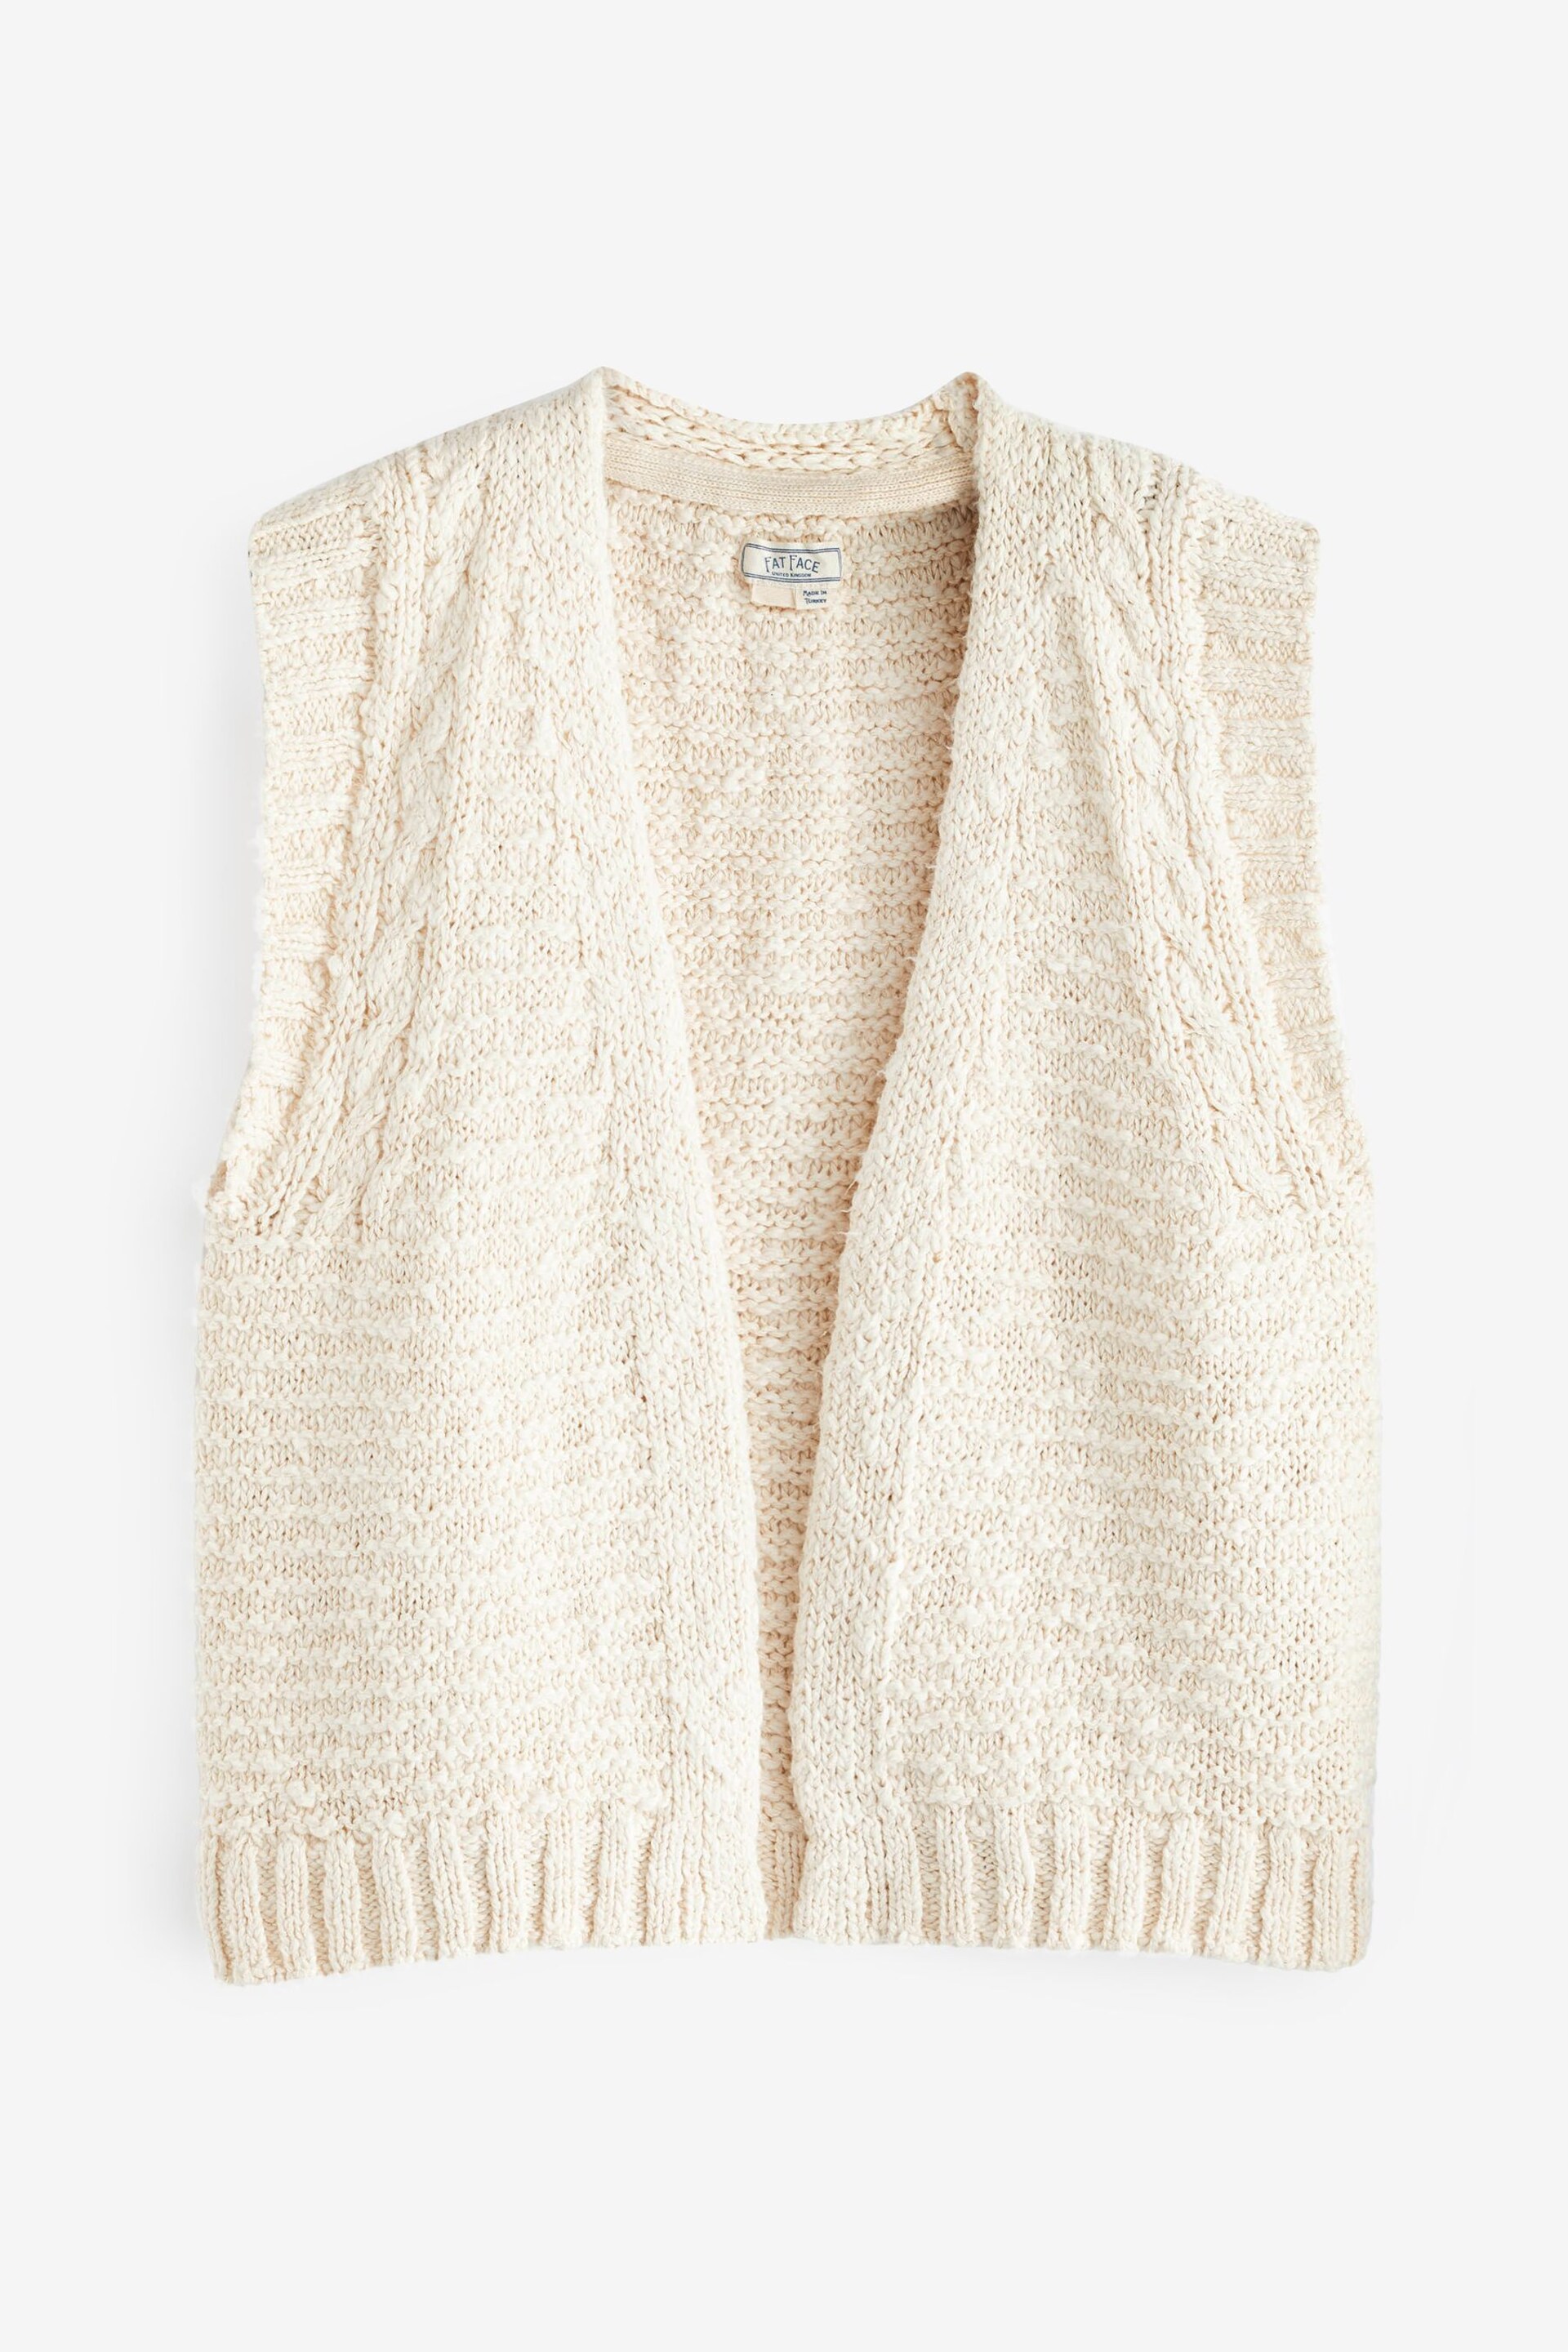 FatFace Natural Knitted Waistcoat - Image 5 of 6